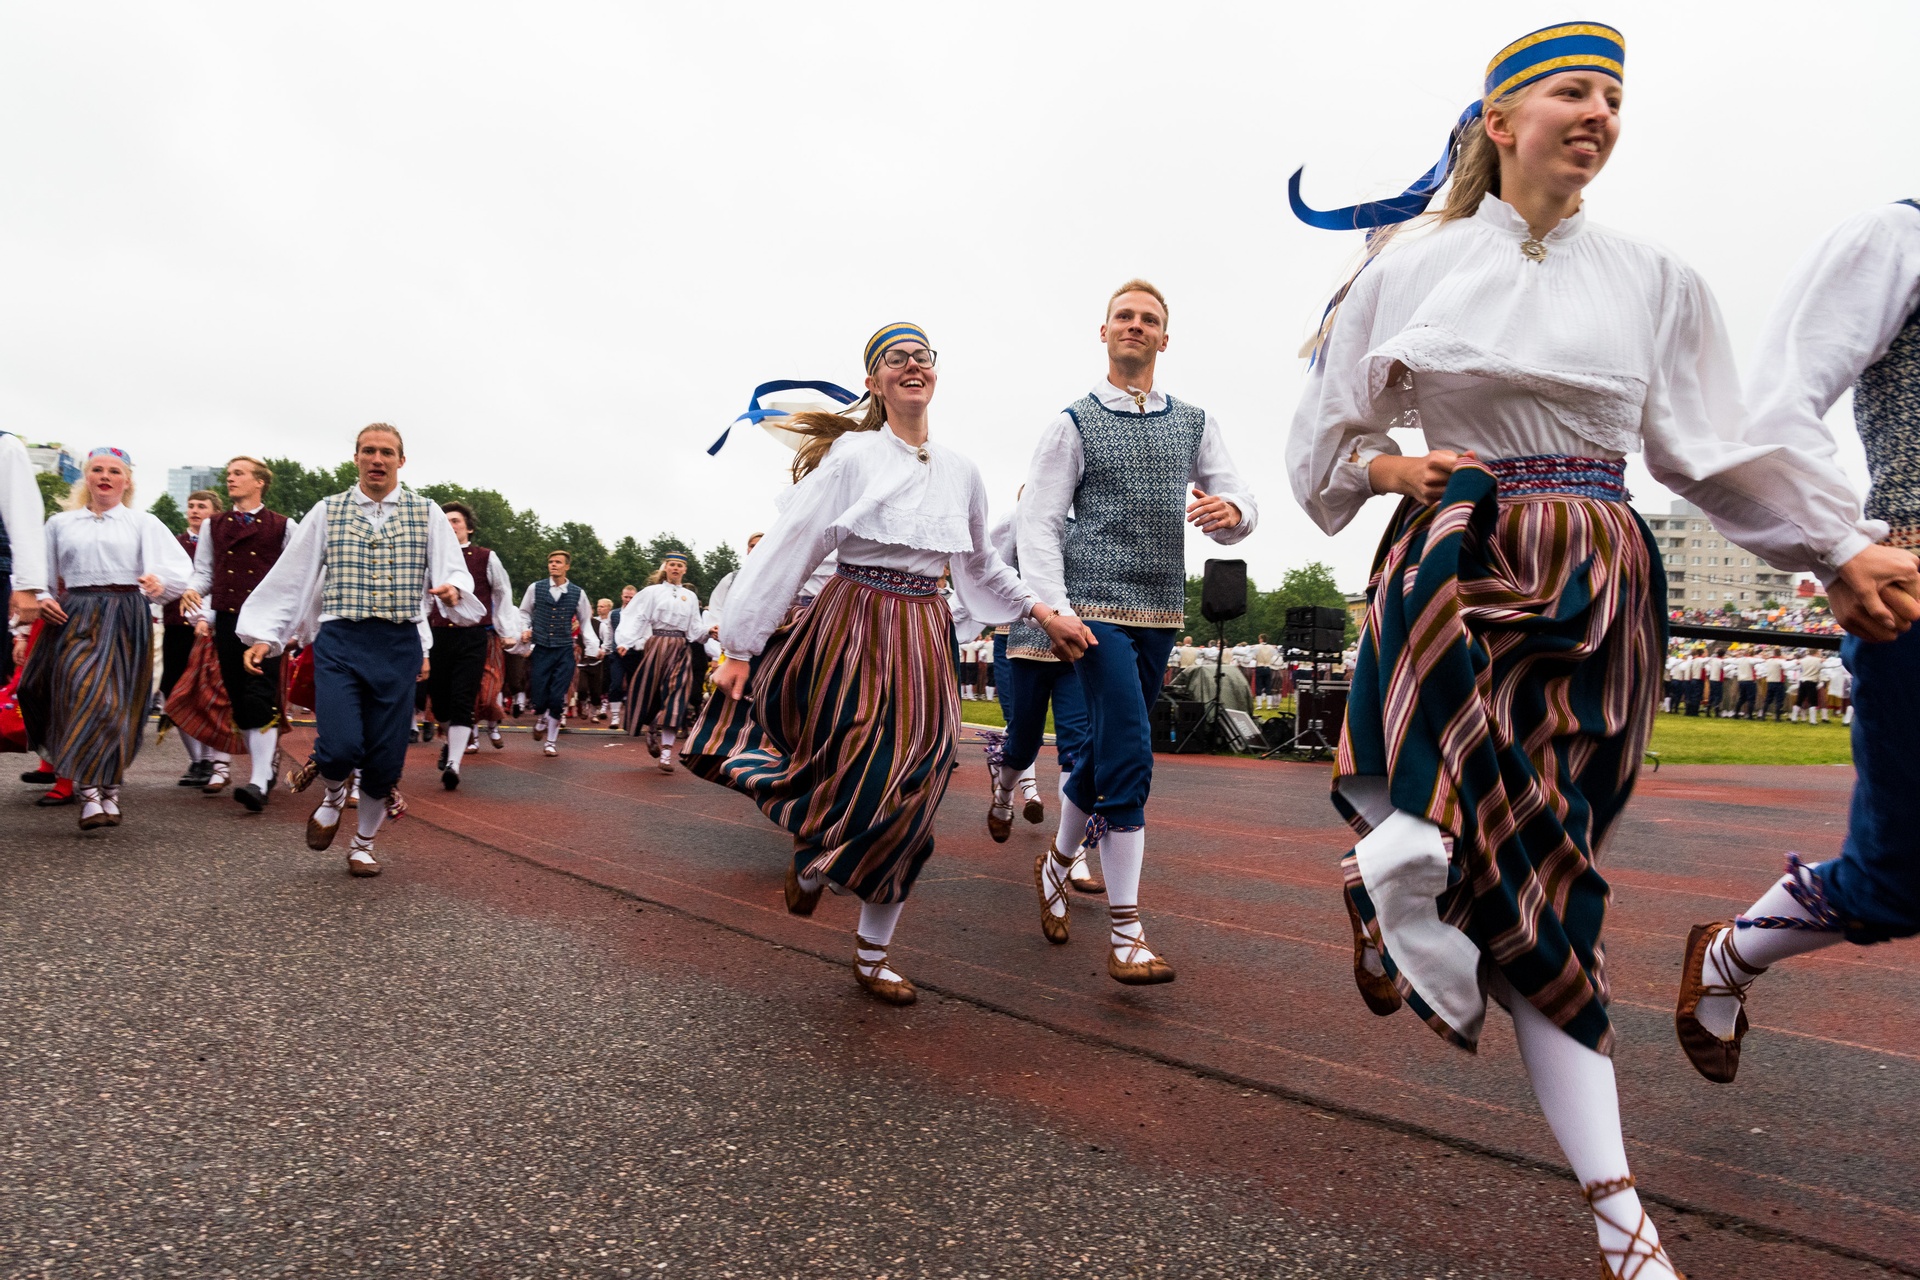 Estonian dancers take the field in traditional costumes